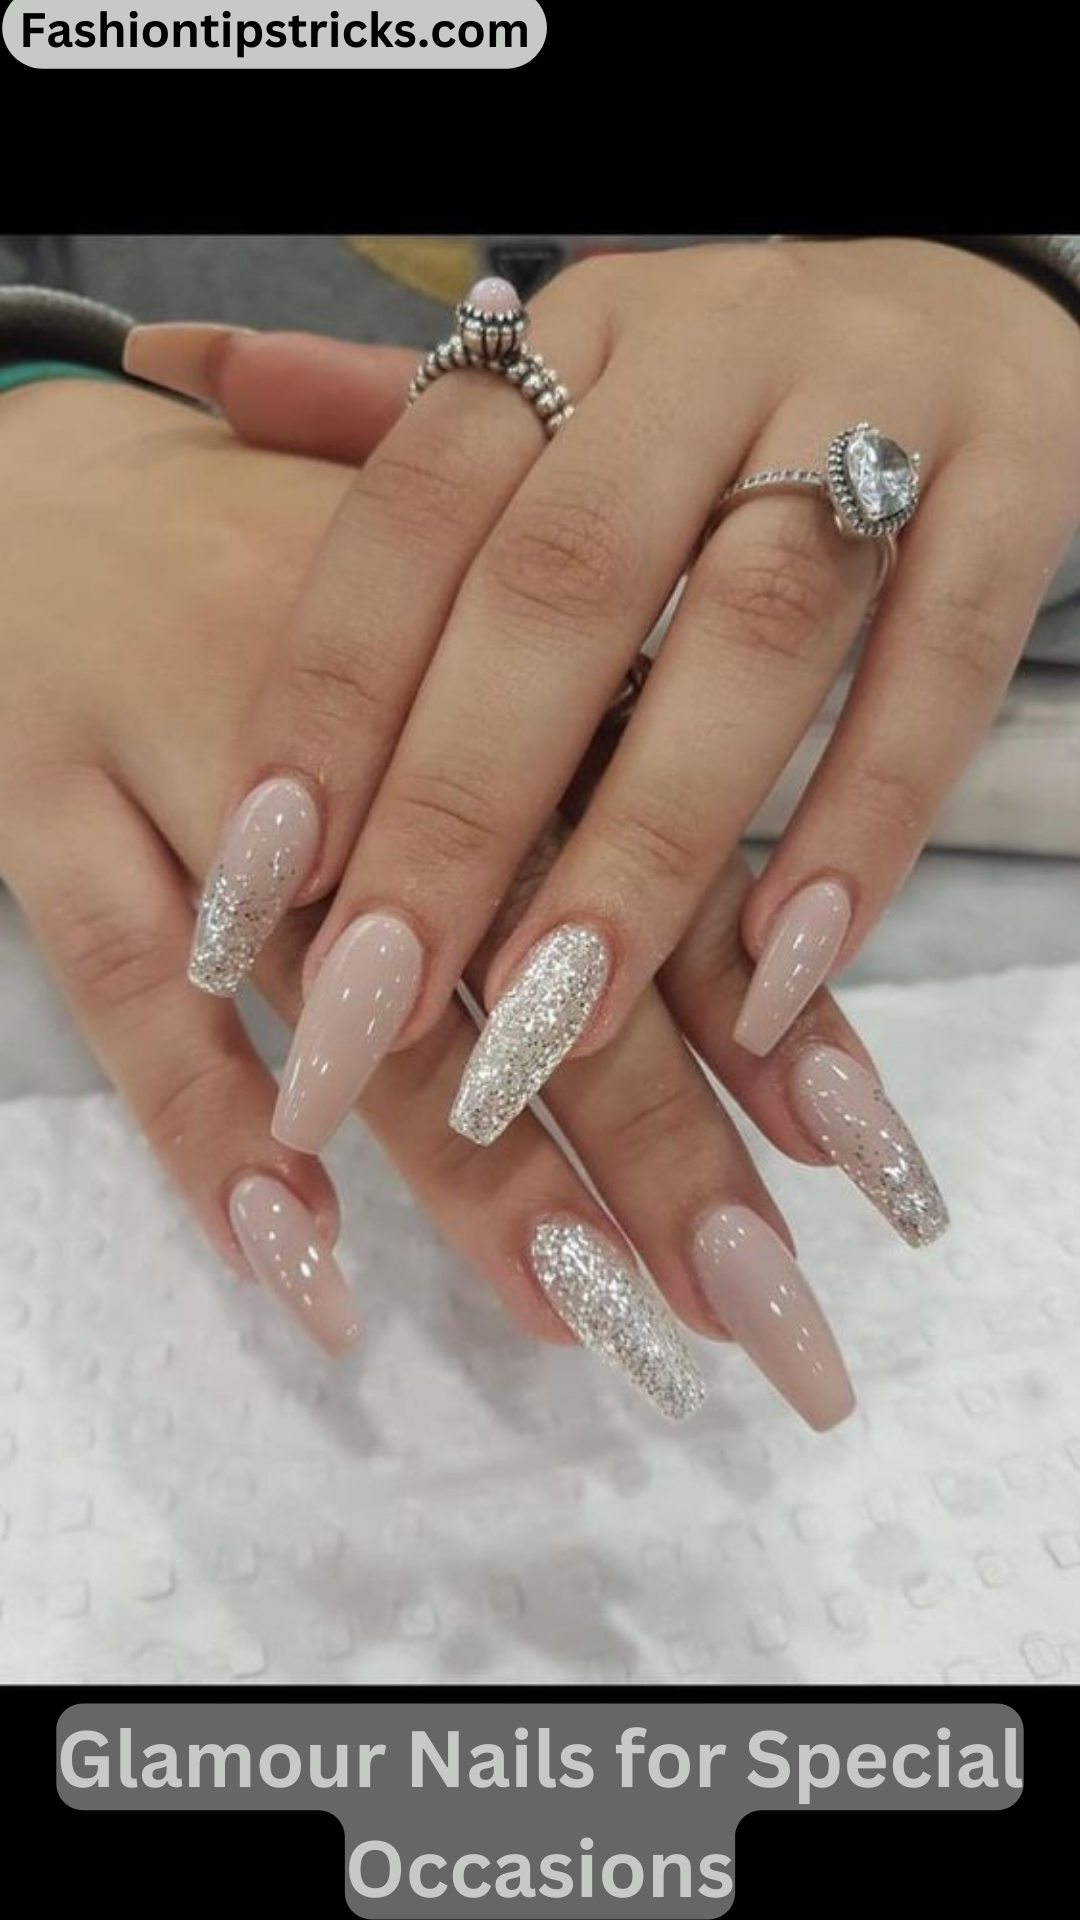 Glamour Nails for Special Occasions